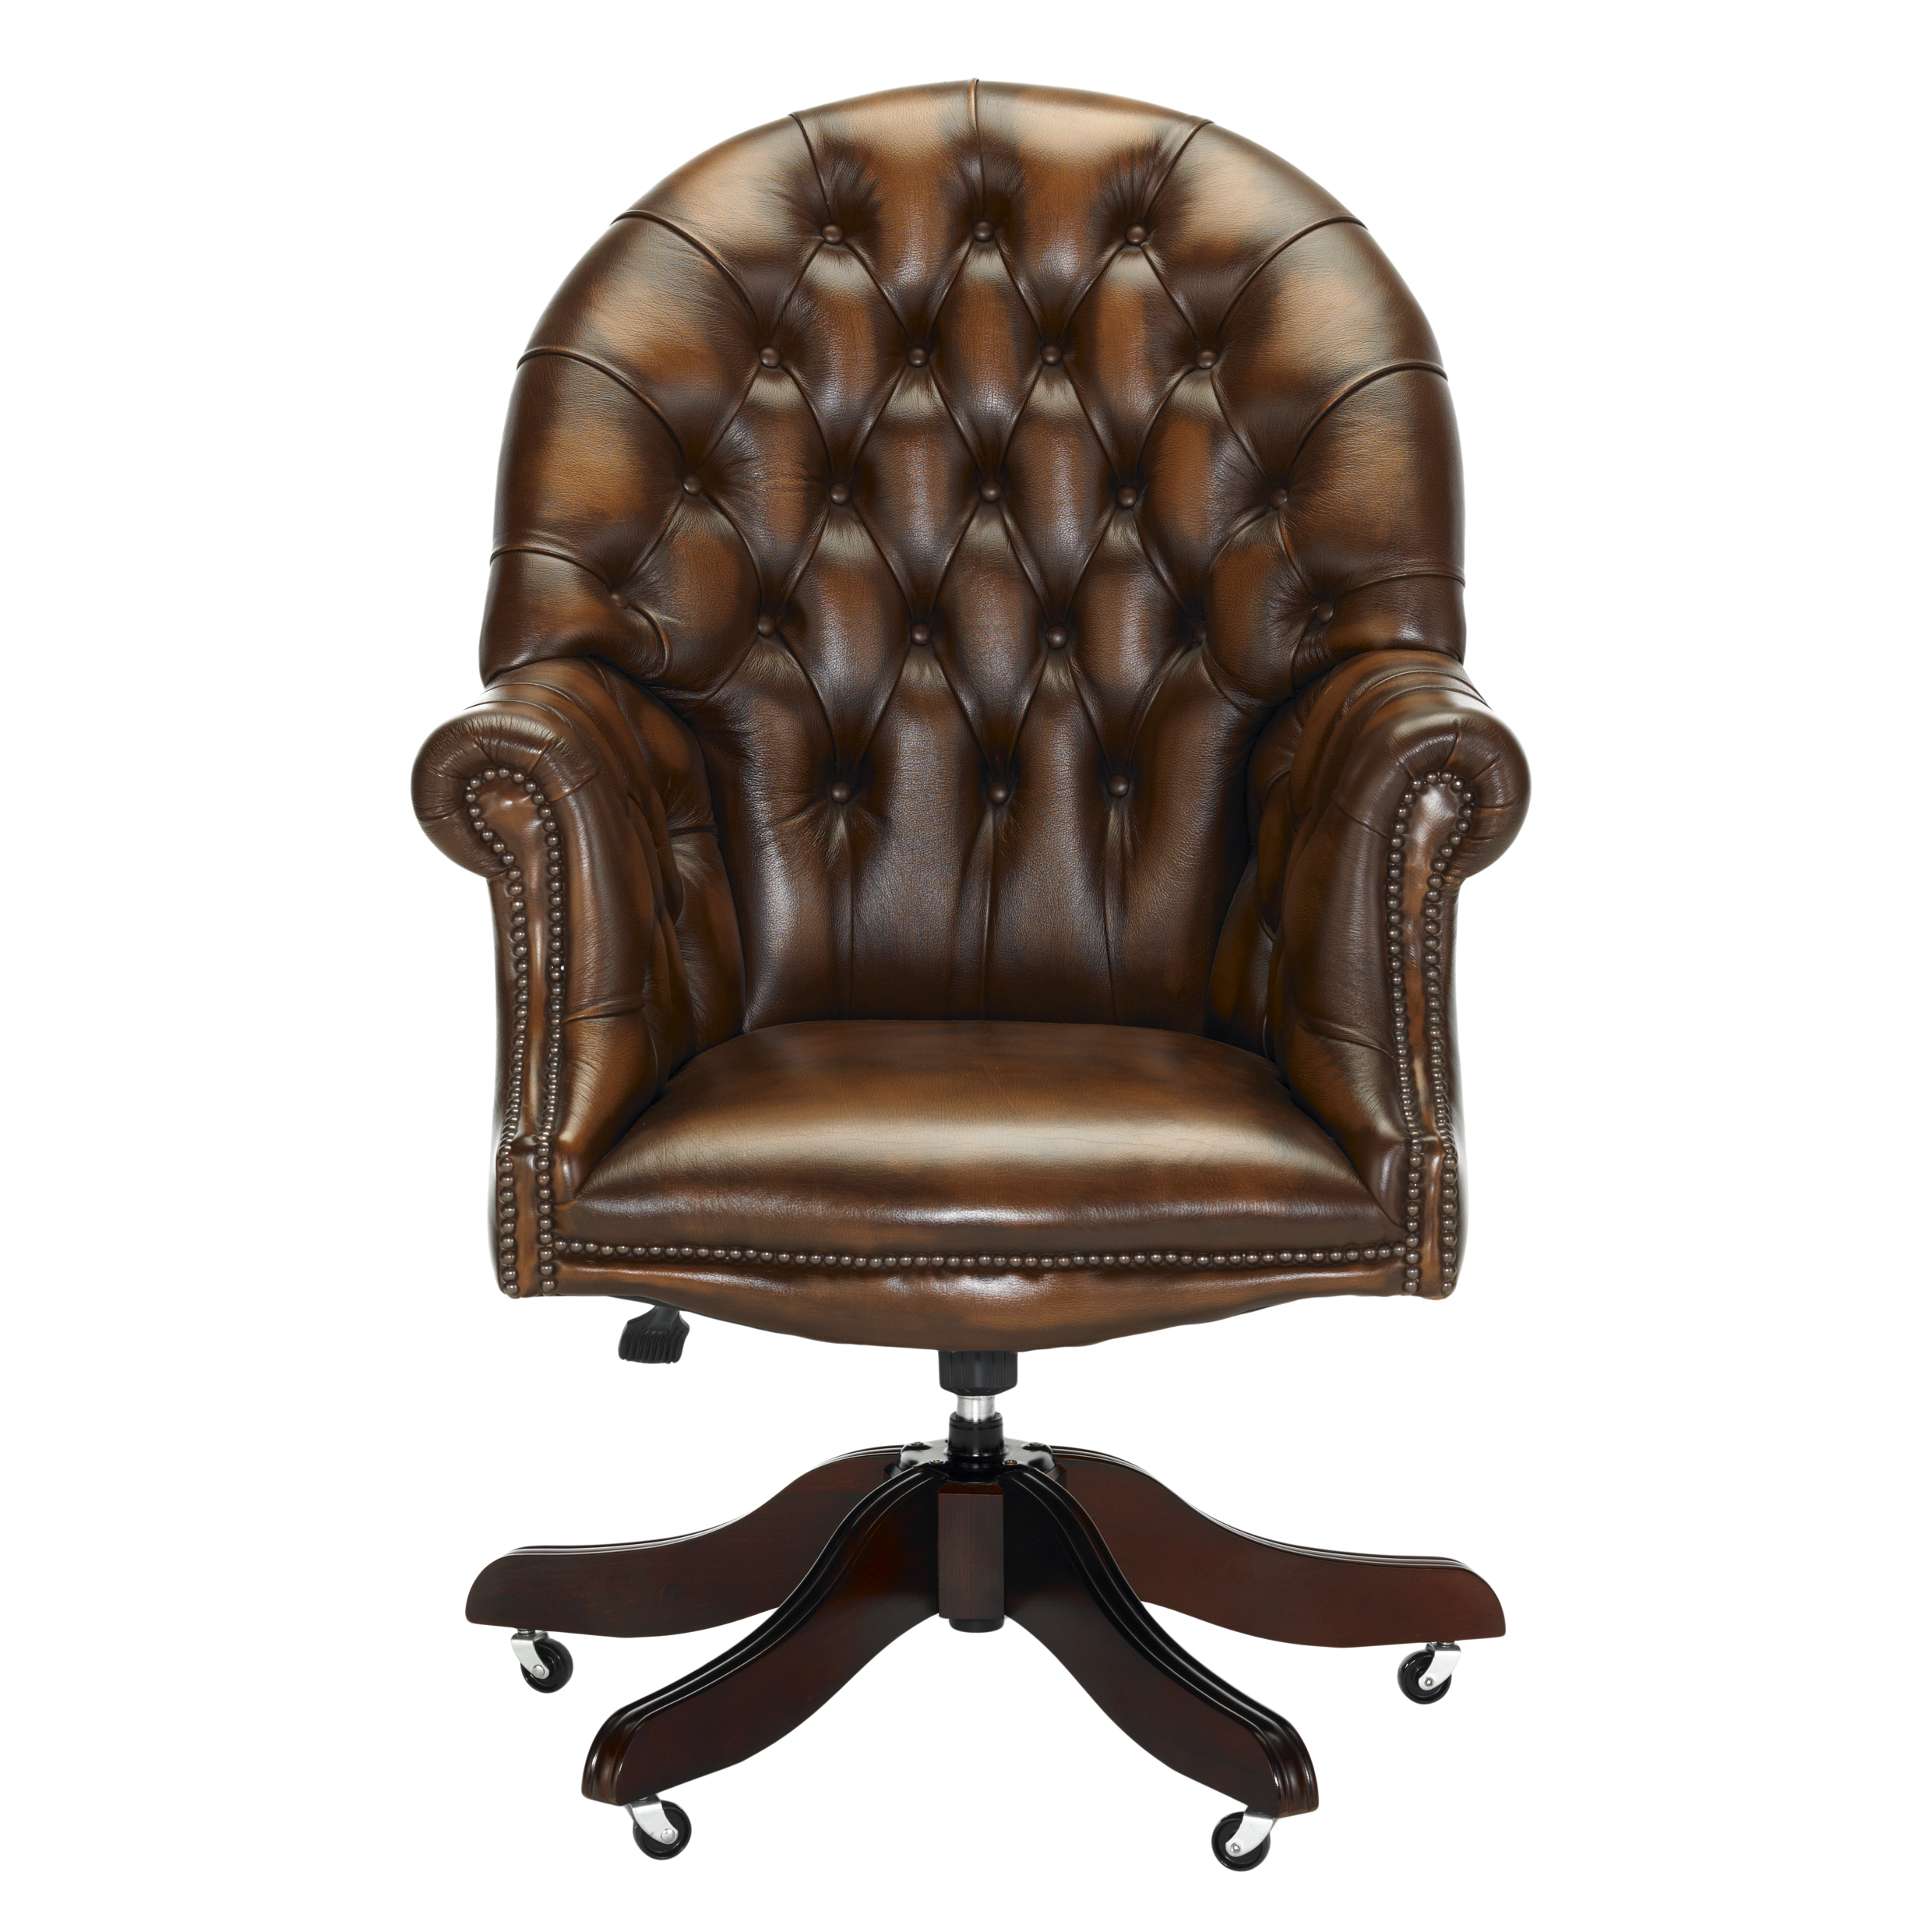 The Directors Office Chair - English Chesterfields